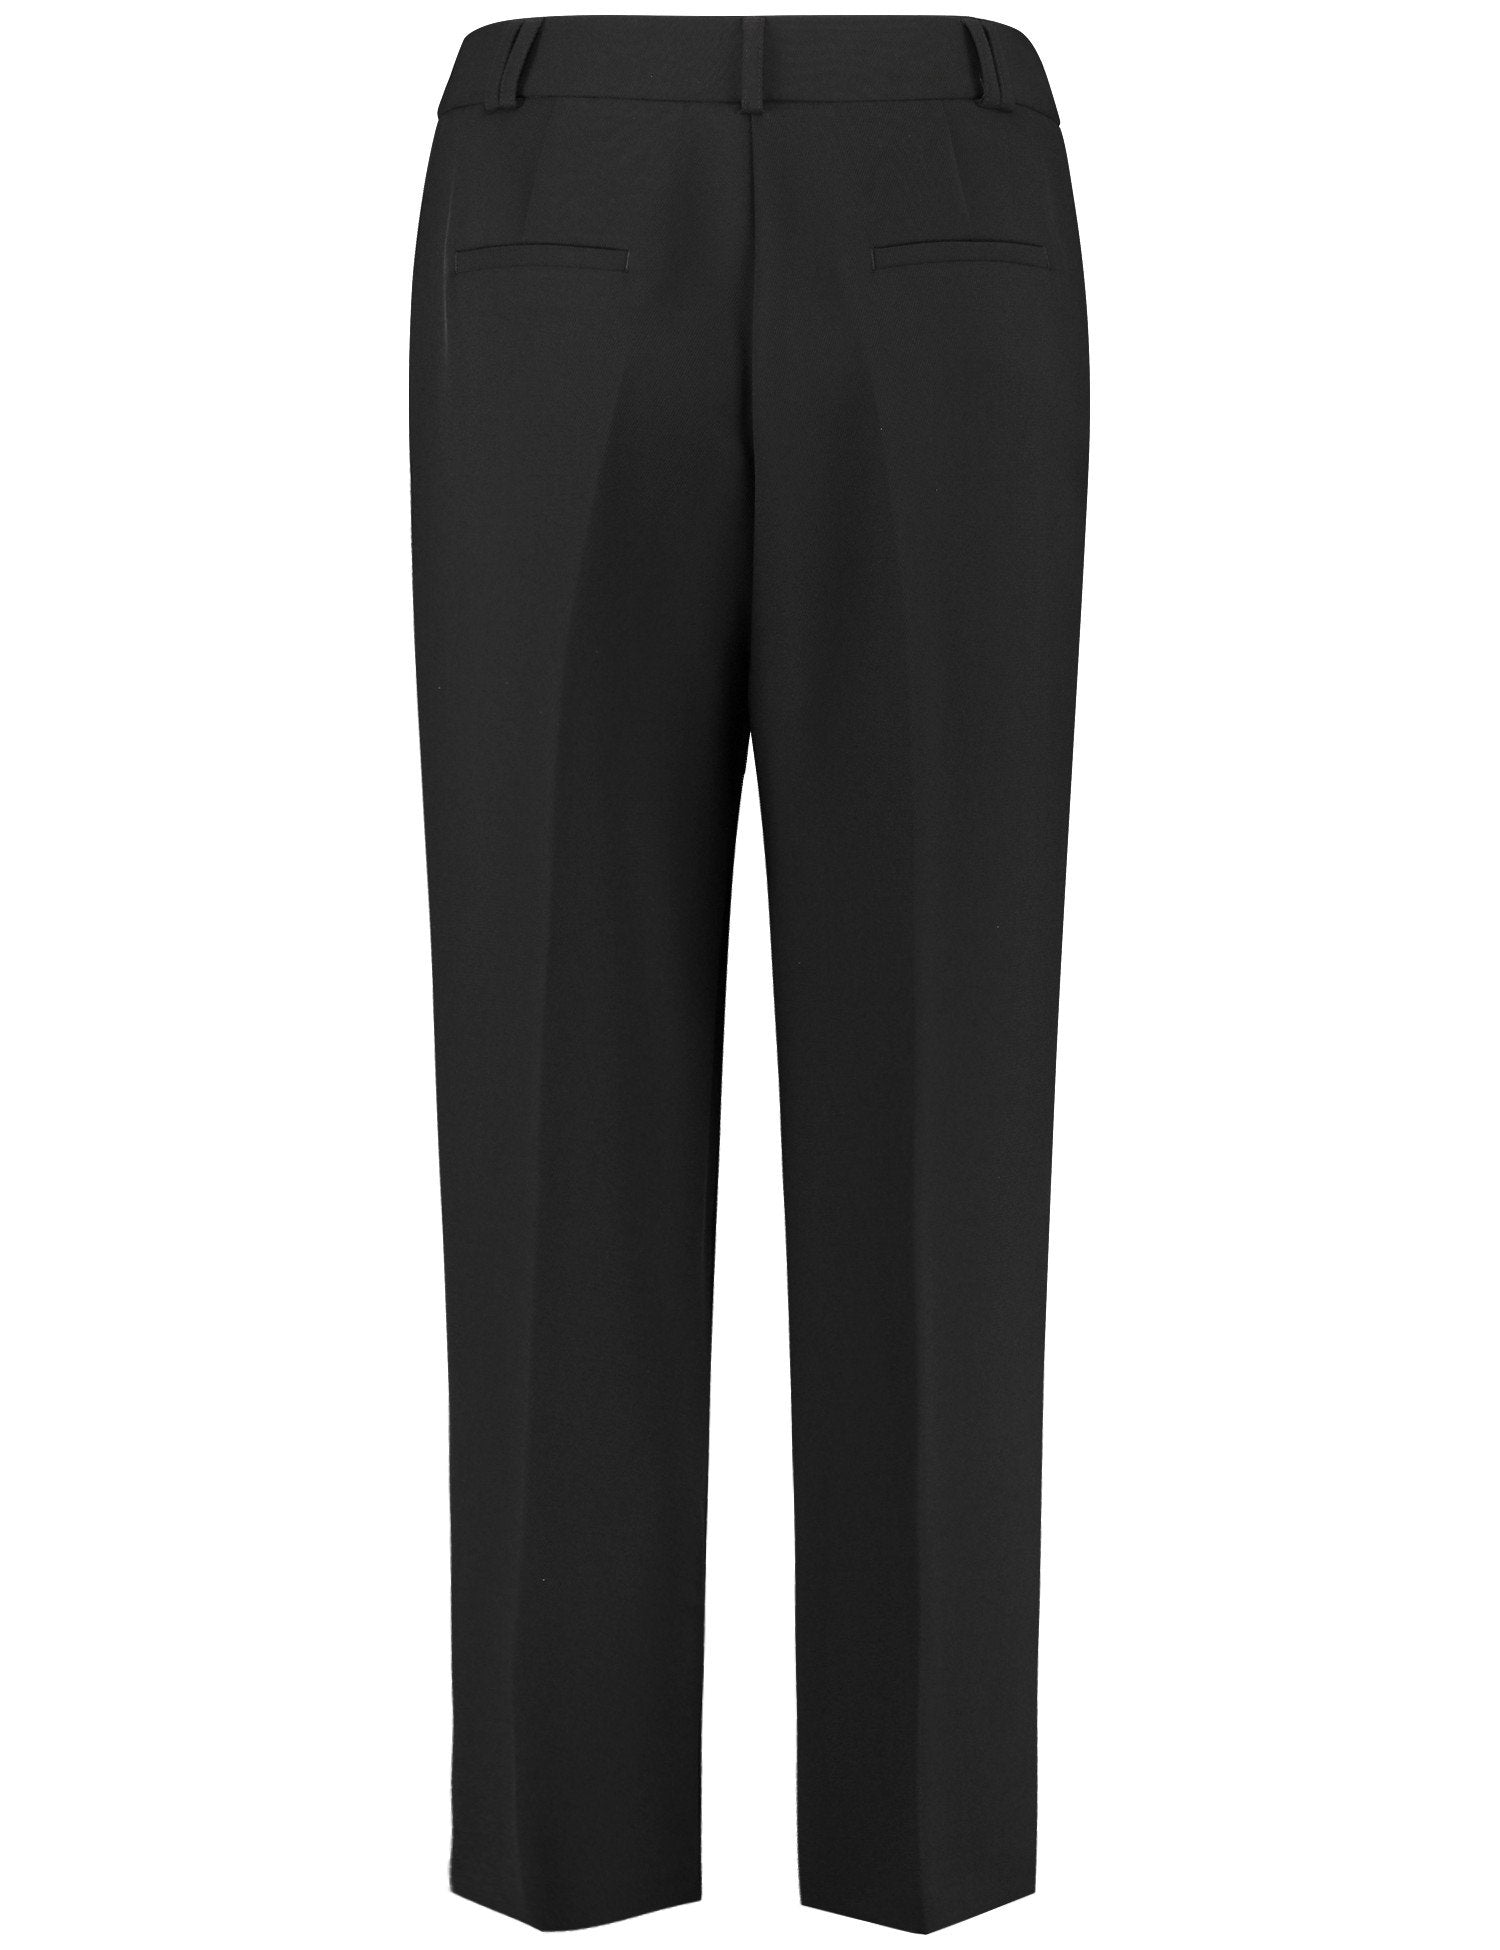 Smart 3/4-Length Trousers_520347-11087_1100_08